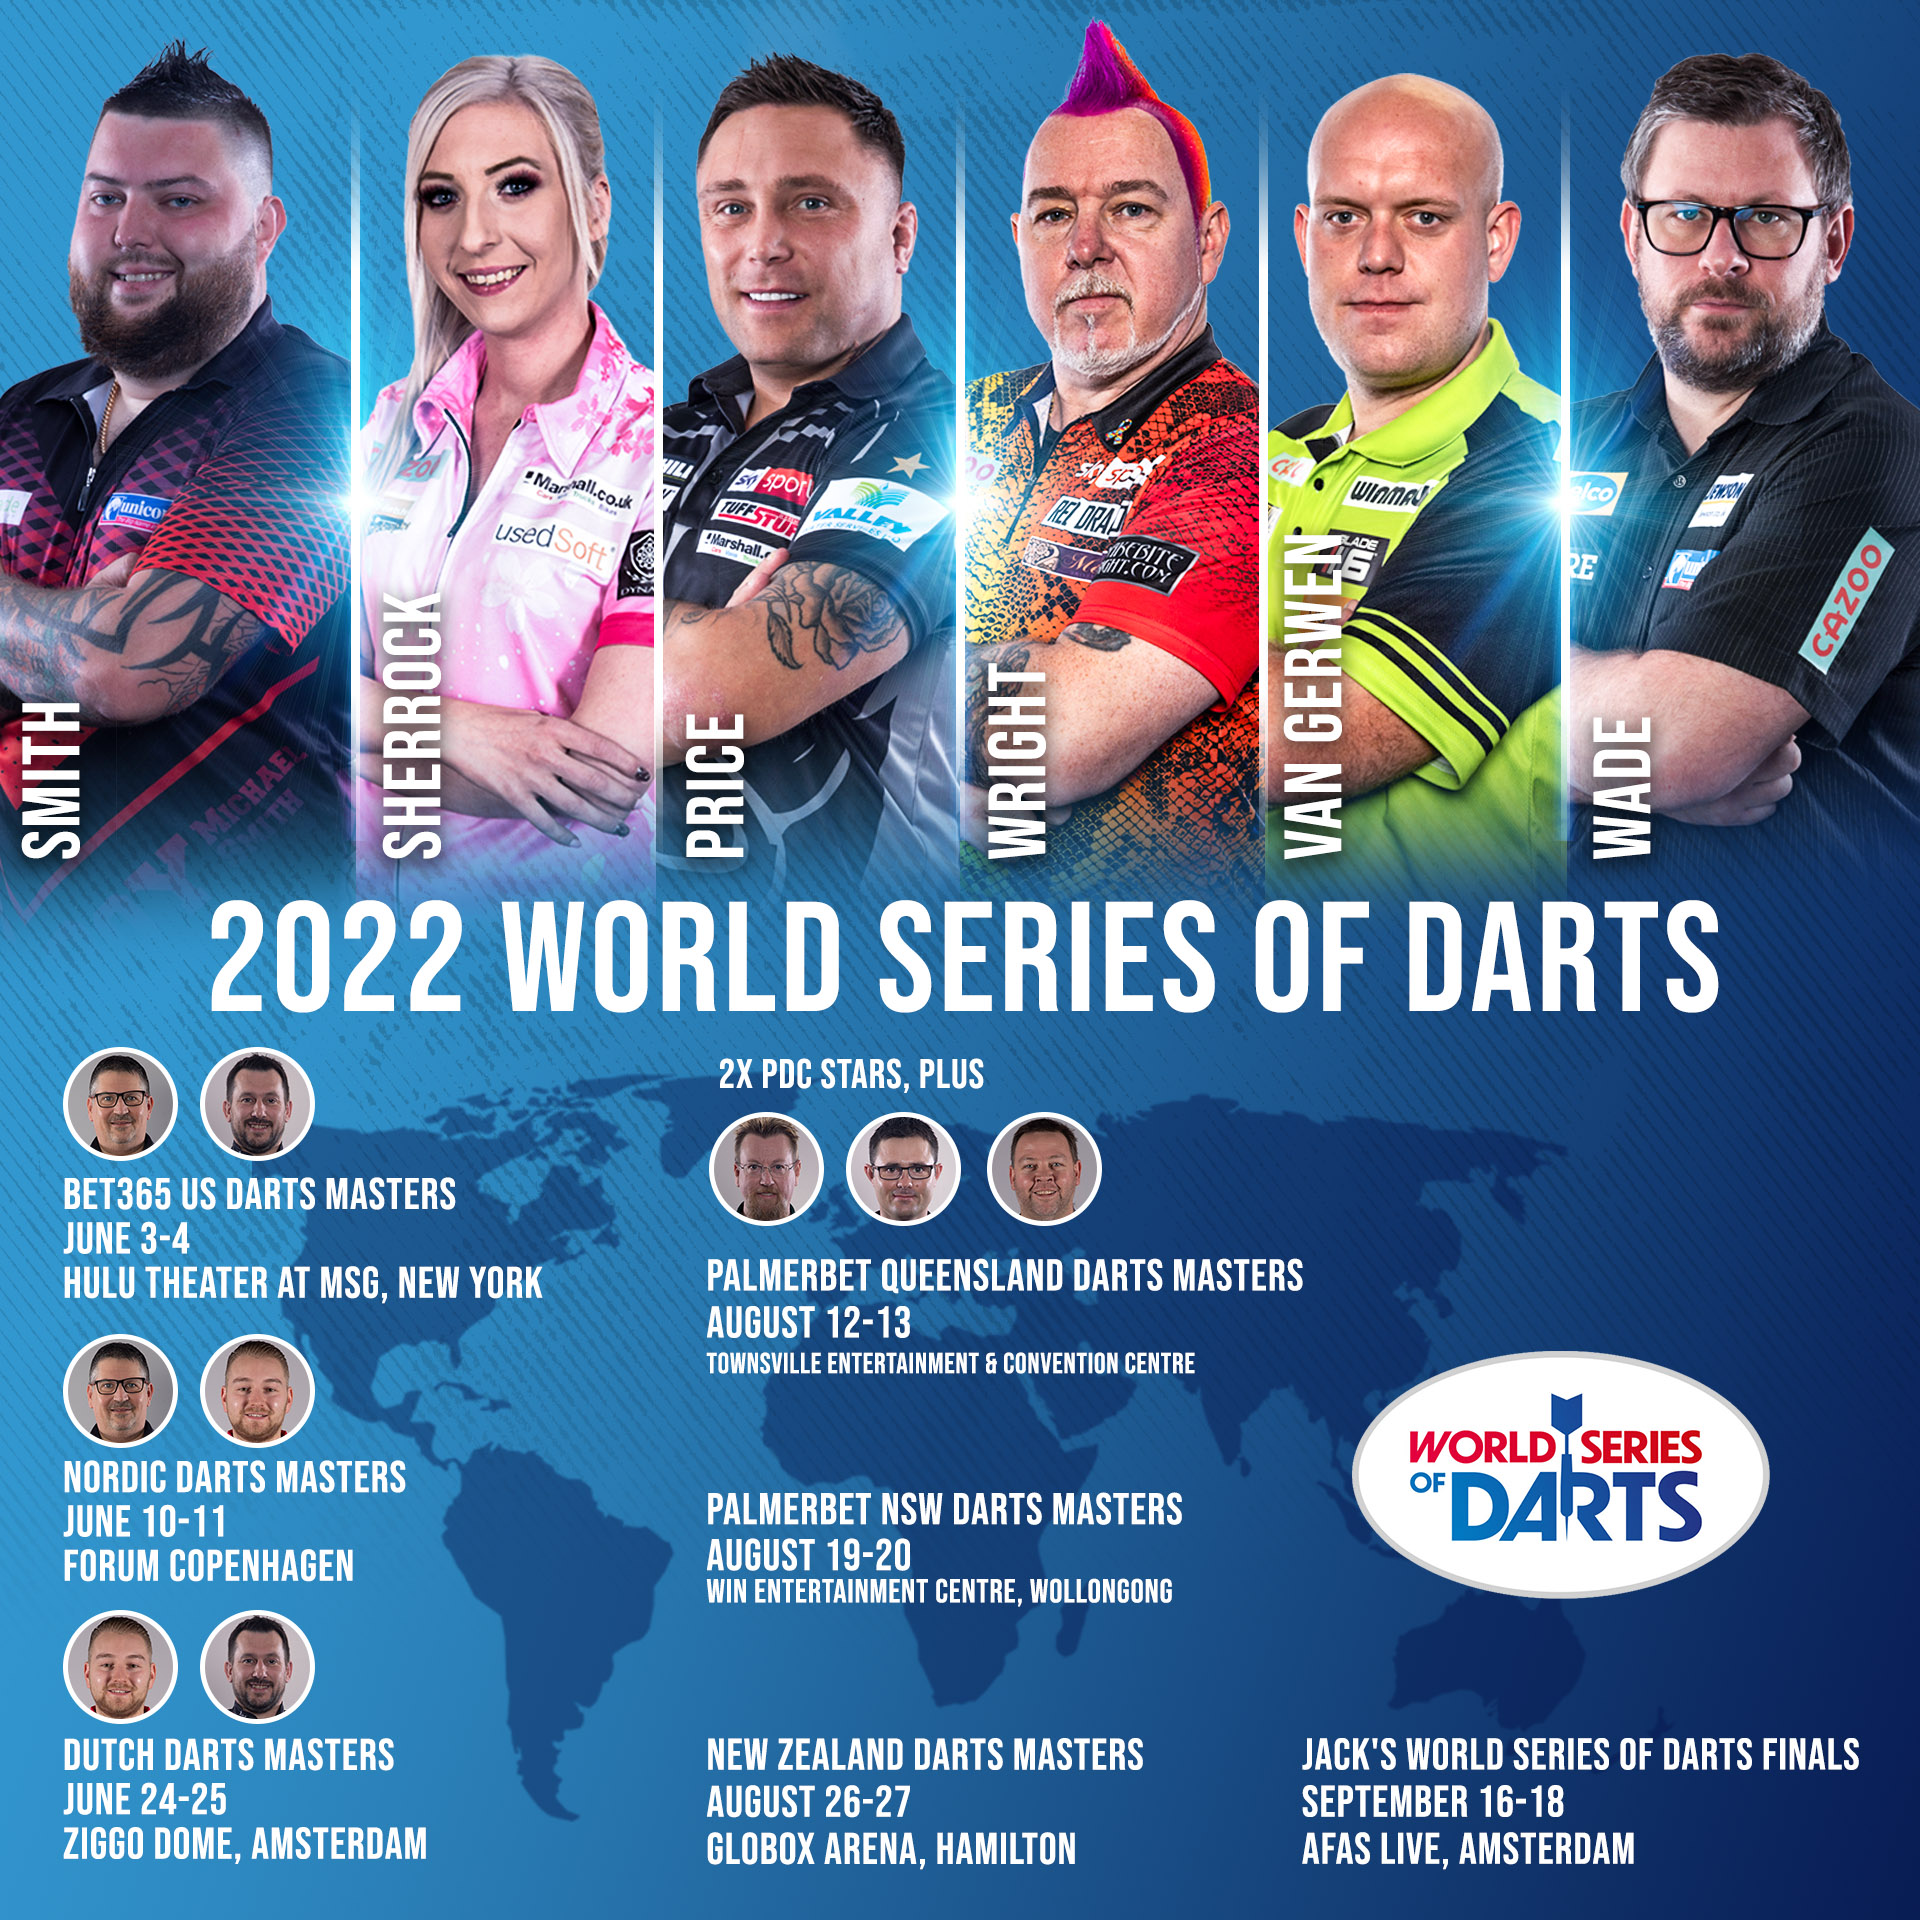 PDC Darts on "𝗪𝗼𝗿𝗹𝗱 𝗙𝗶𝗲𝗹𝗱 Peter Wright, Gerwyn Price, van Gerwen, Fallon Sherrock, Michael Smith and James Wade will represent the PDC every World Series event in 2022.